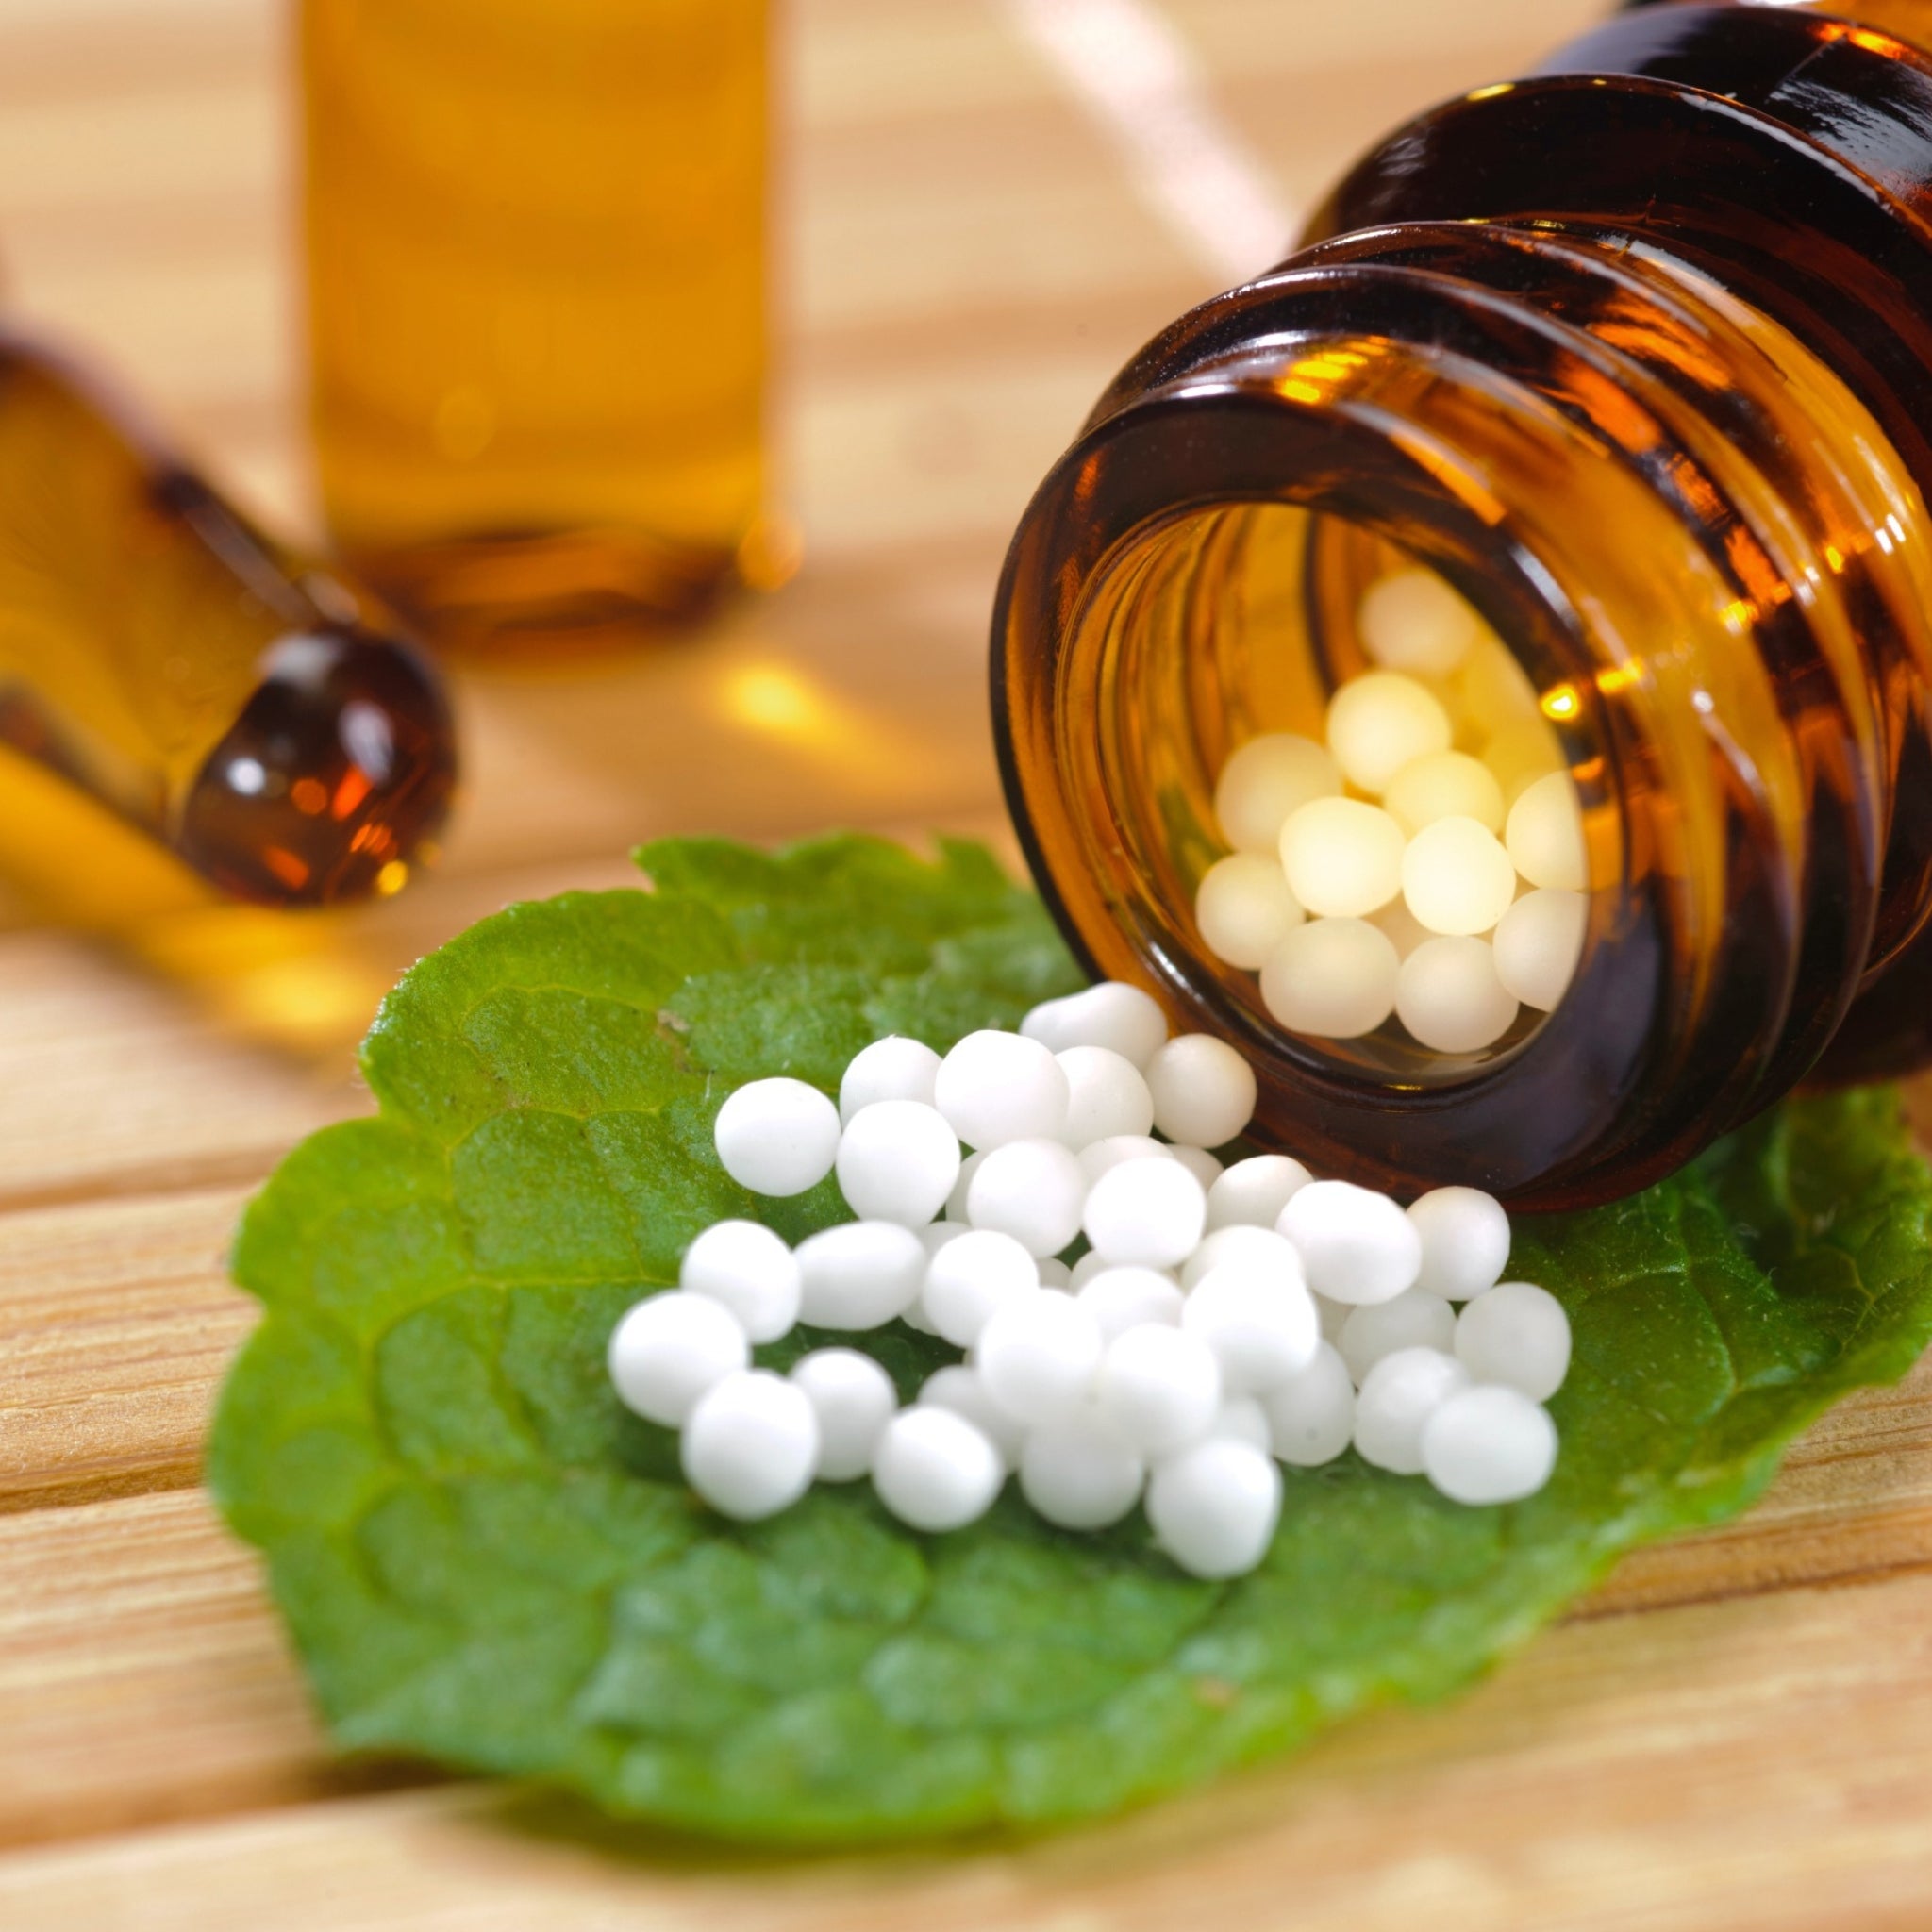 Dire Patients Scour the Web for Homeopathic Remedies